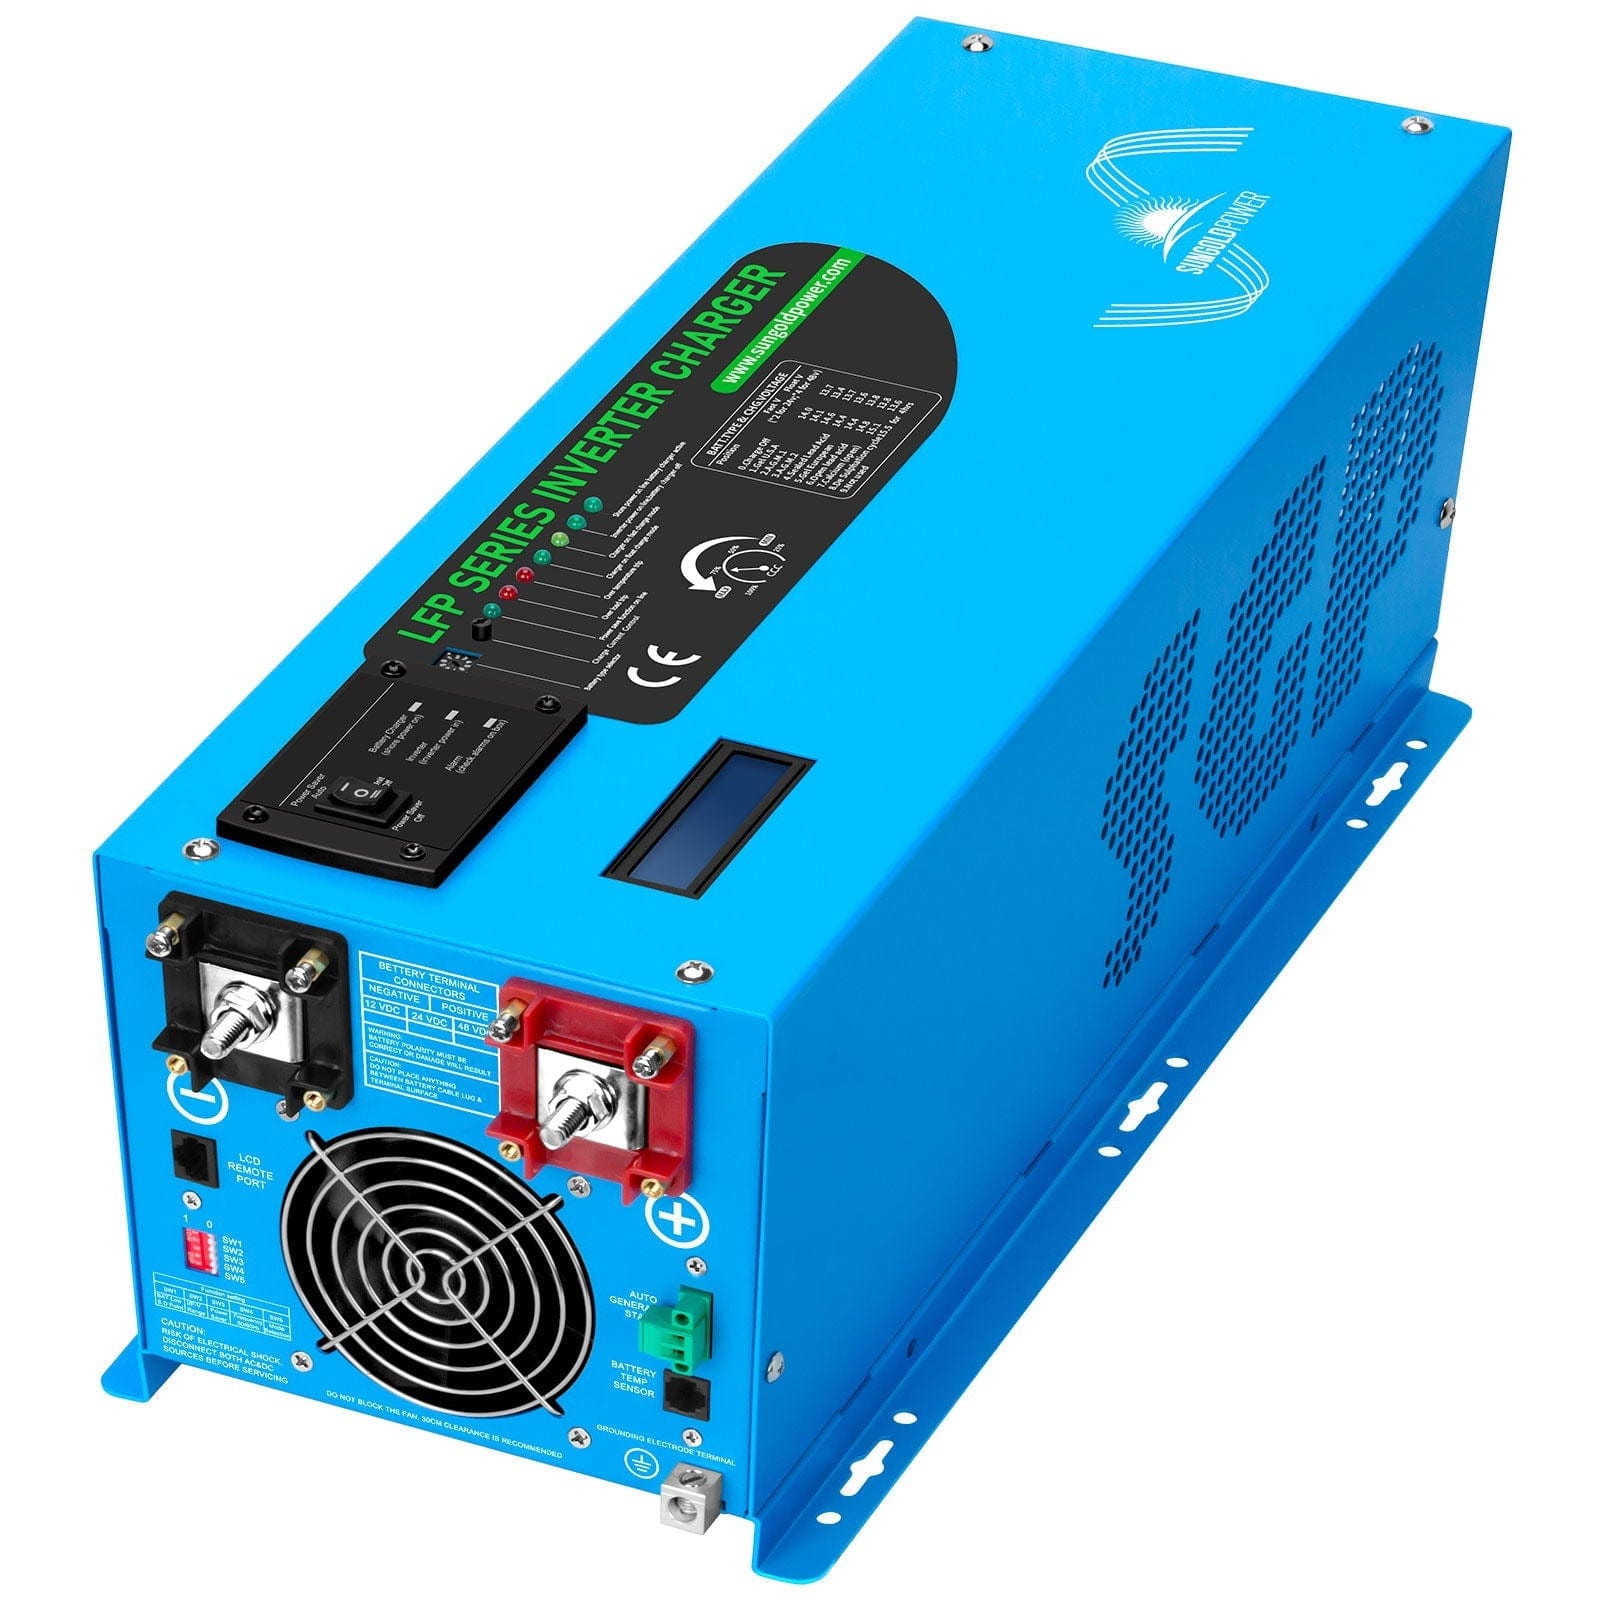 3000W DC 24V Pure Sine Wave Inverter With Charger SunGoldPower 120V / 120V / Only Inverter Pure Sine Wave Inverter With Charger